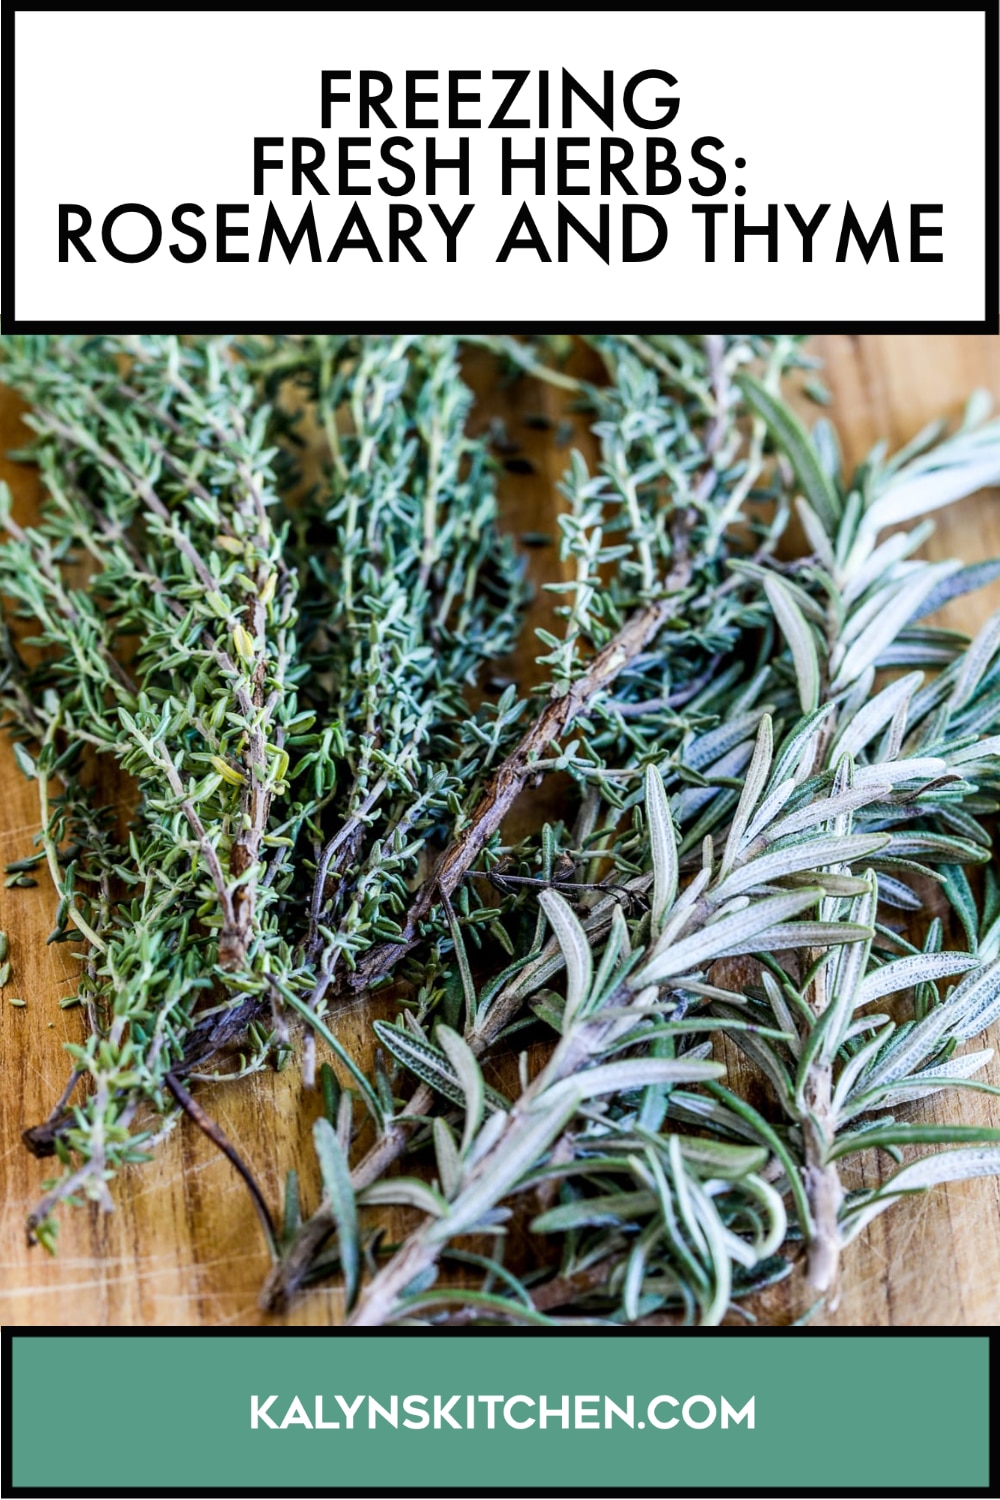 Pinterest image of Freezing Fresh Herbs: Rosemary and Thyme